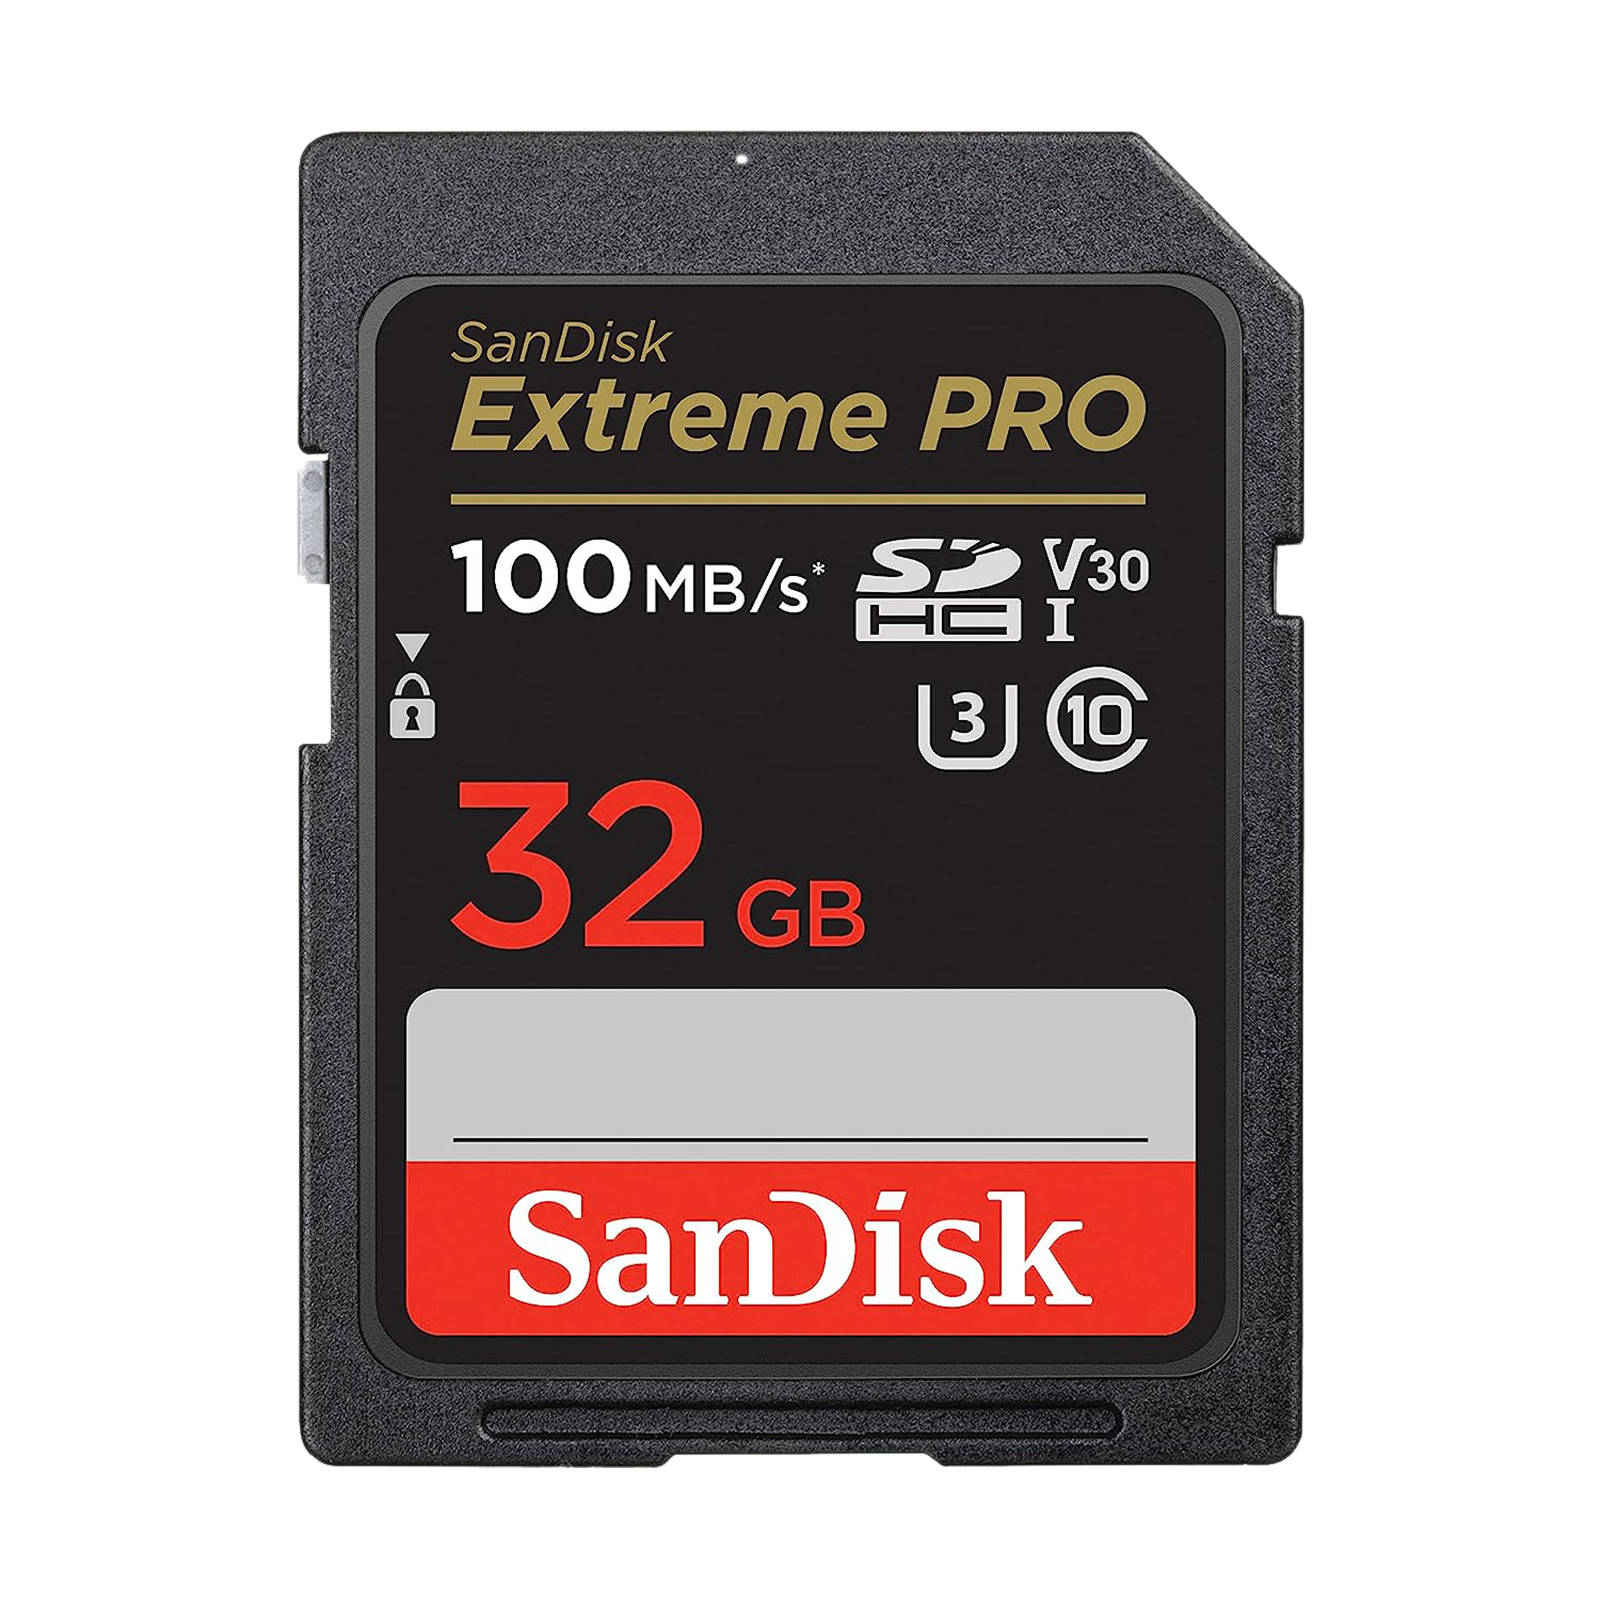 SanDisk Extreme Pro SDHC 32GB Class 10 100MB/s Memory Card